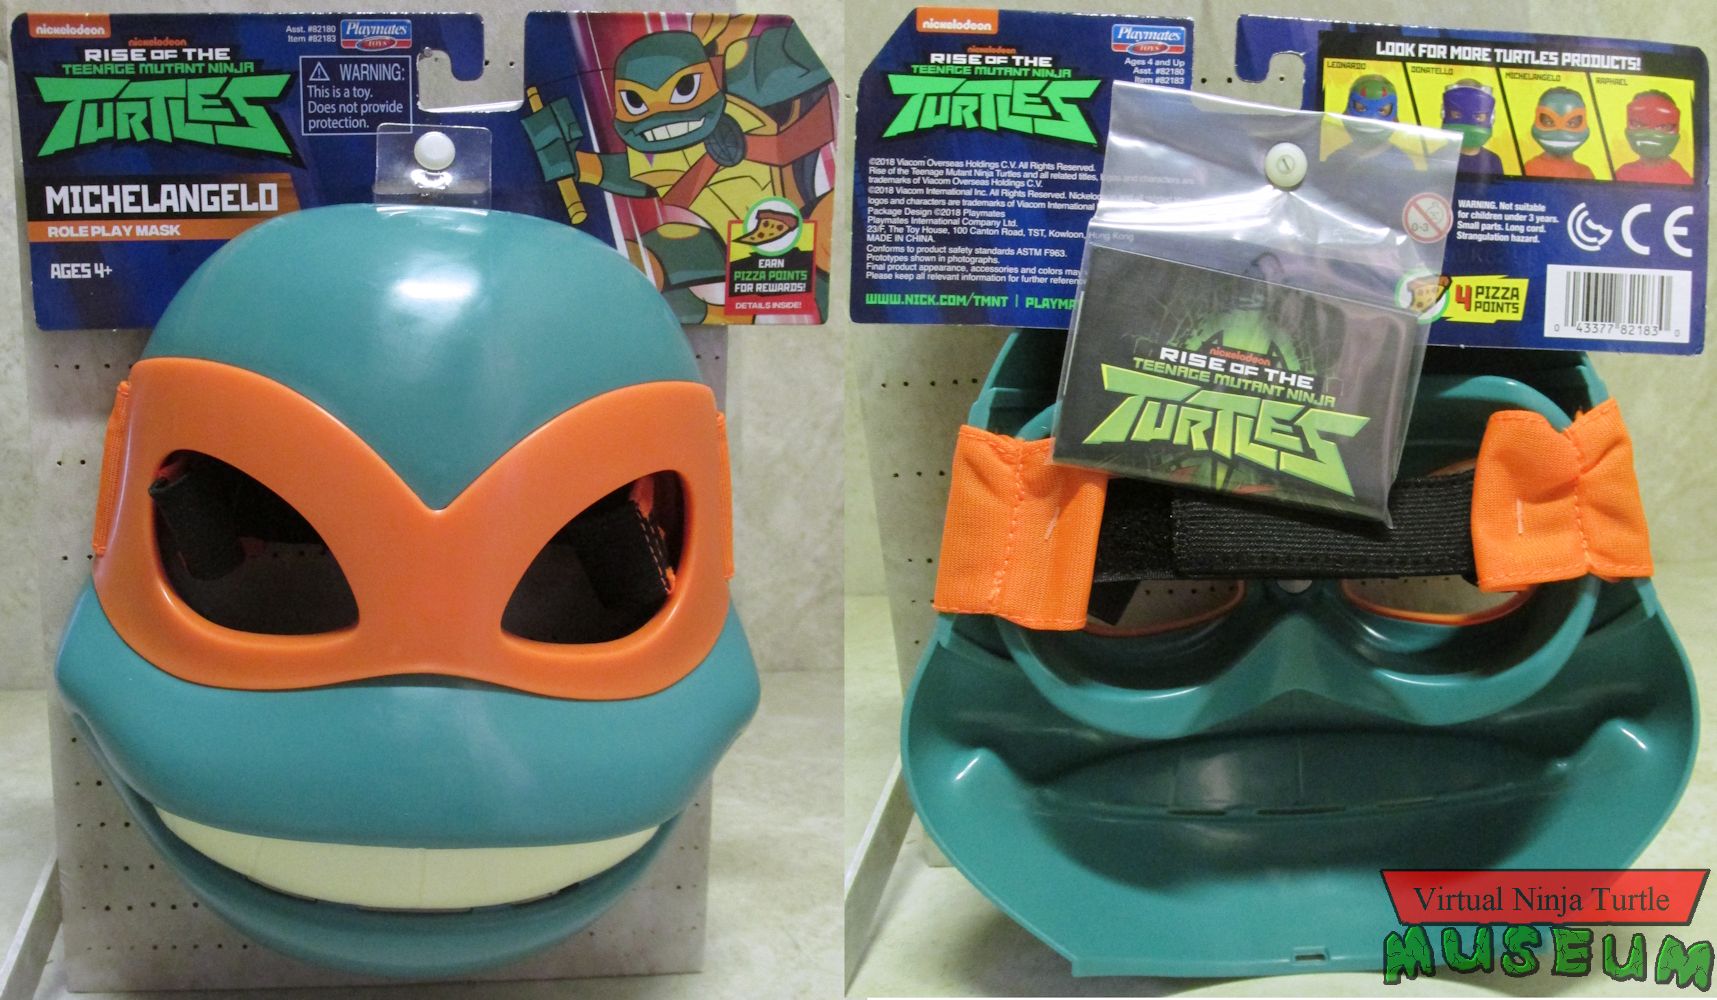 Michelangelo Role Play Mask front and back